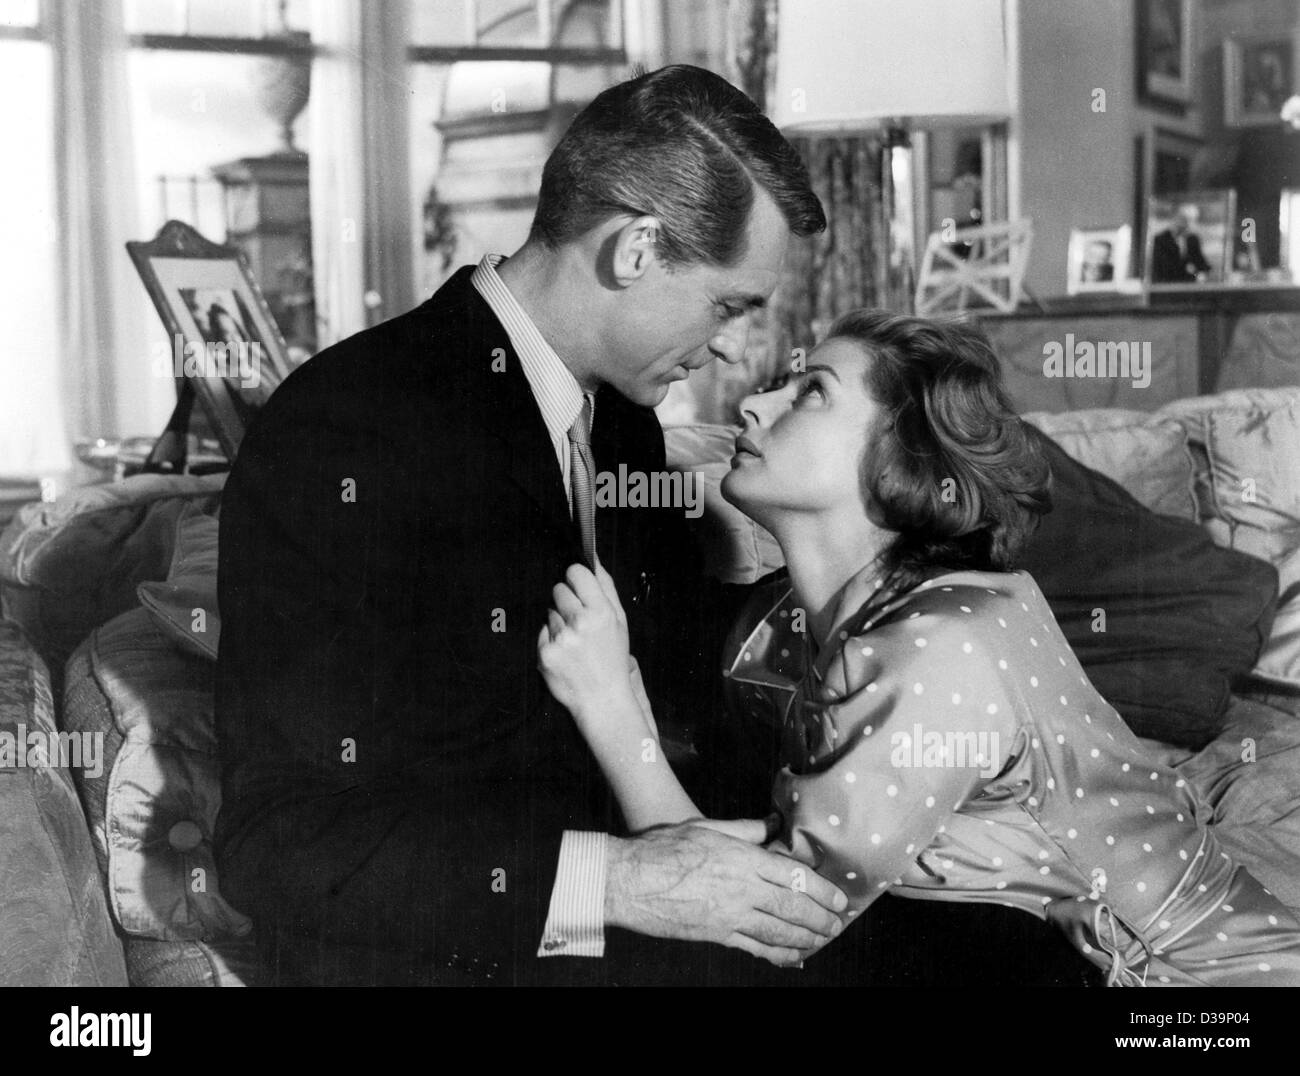 (dpa files) - Ingrid Bergman in the role of Anne Kalman looks into the eyes of her film partner Cary Grant alias Philip Adams in a movie scene of 'Indiscreet' (1958). Ingrid Bergman died 20 years ago on her 67th birthday on 29 August 1982 in London. The Swedish actress, born on 29 August 1915 in Sto Stock Photo